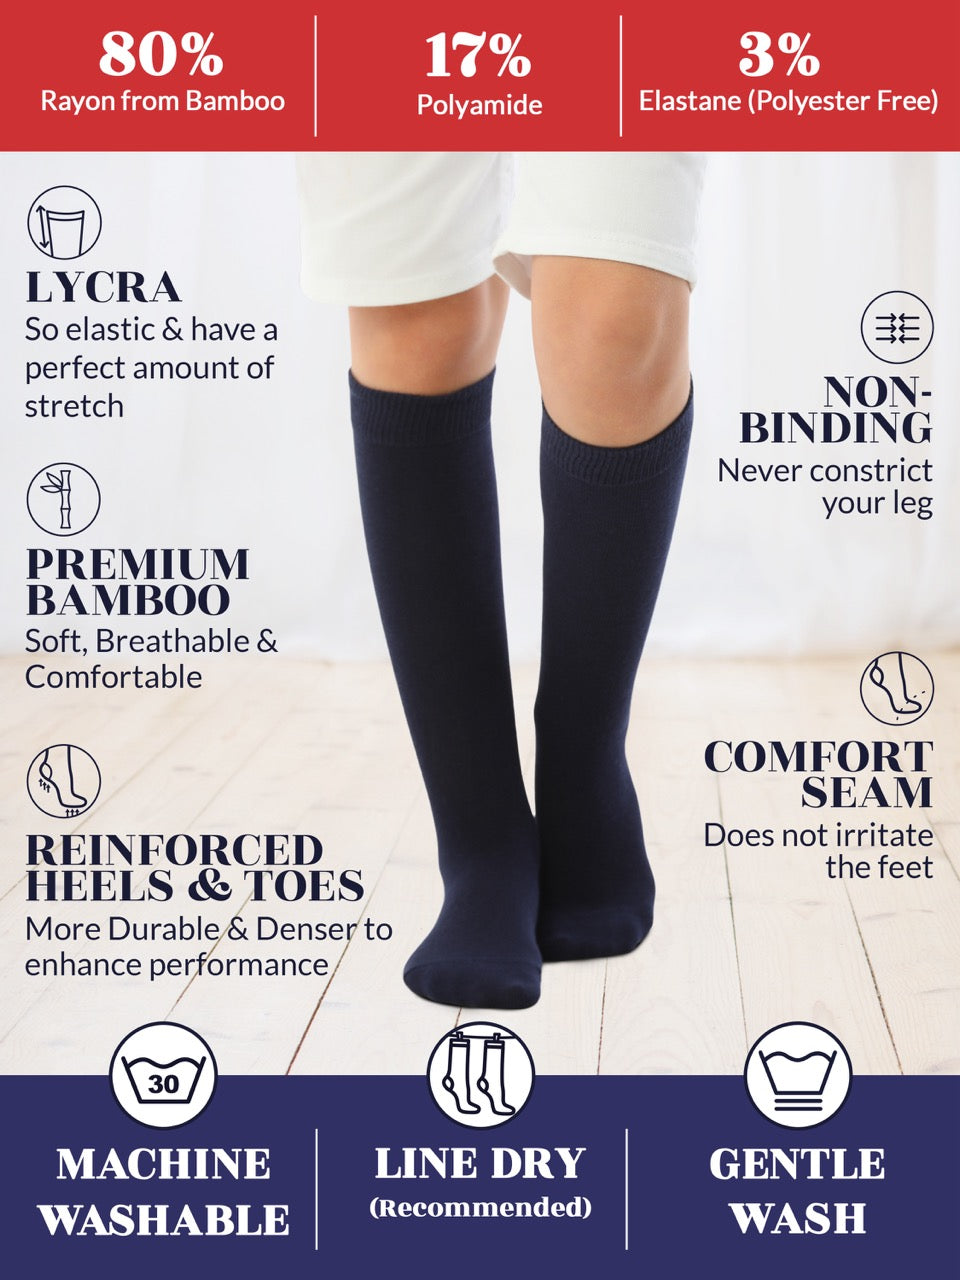 Experience the ultimate comfort and style with Hugh Ugoli Kids Bamboo School Socks. These navy blue socks perfect for school or everyday wear, our high-quality knee-high socks meet uniform standards while reducing blisters and staying in place. Available in four sizes for children aged 3-14 years